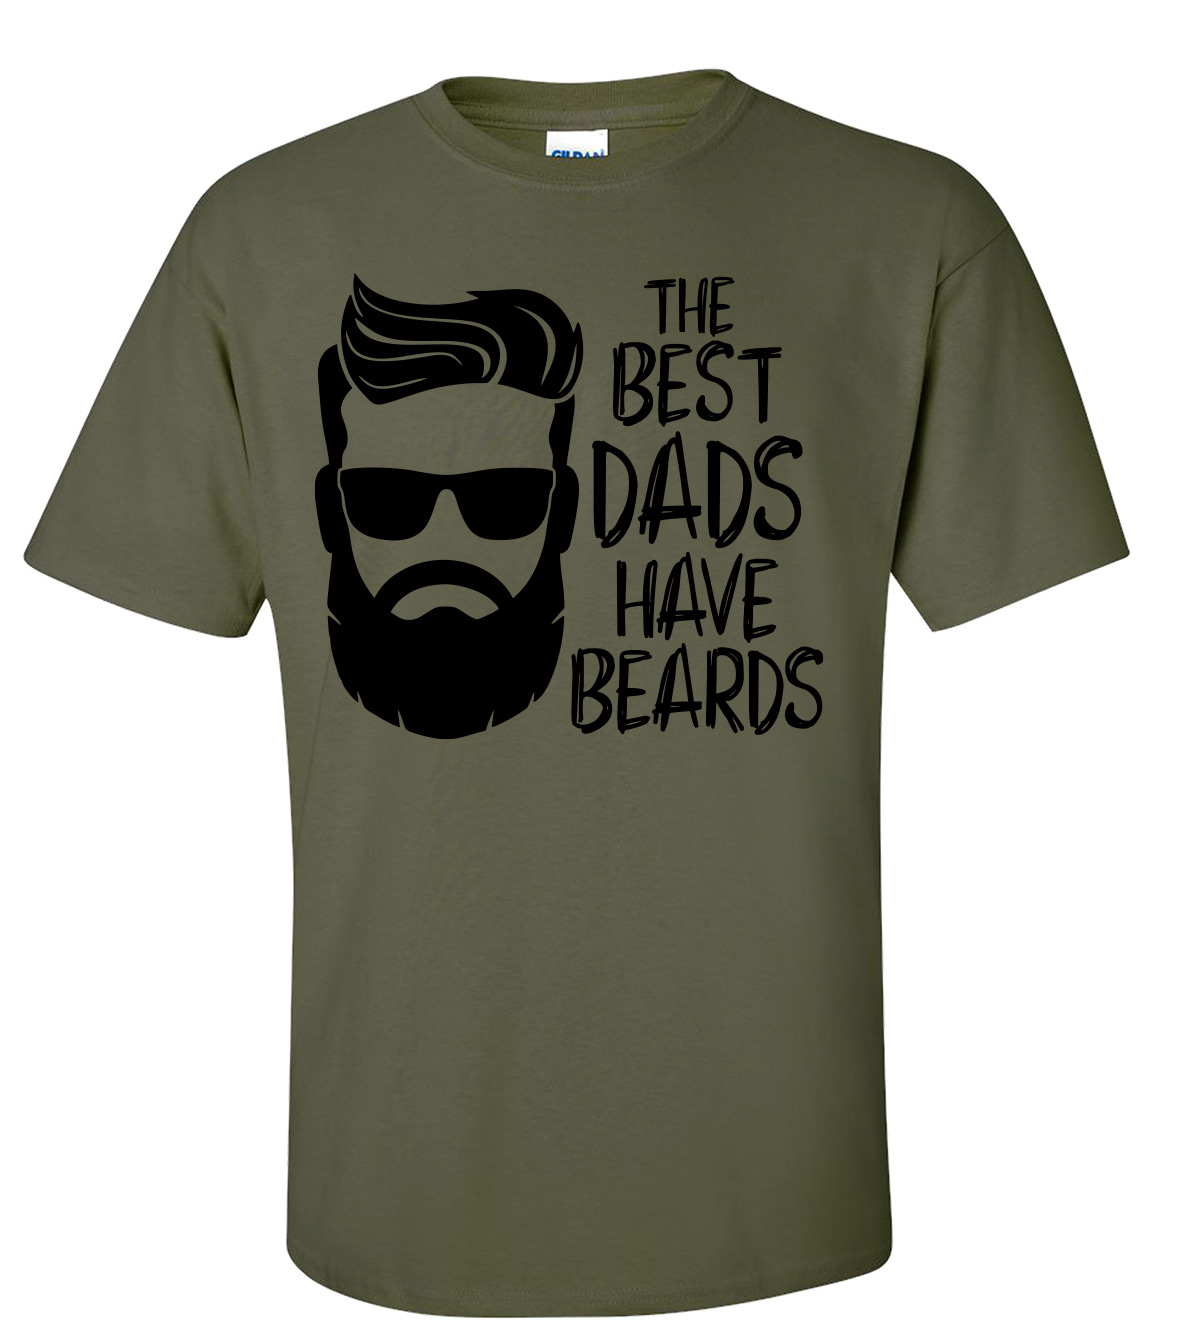 Men's Father's Day The Best Dads Have Beards Funny Short Sleeve Graphic T-shirt-Military-small - image 1 of 4